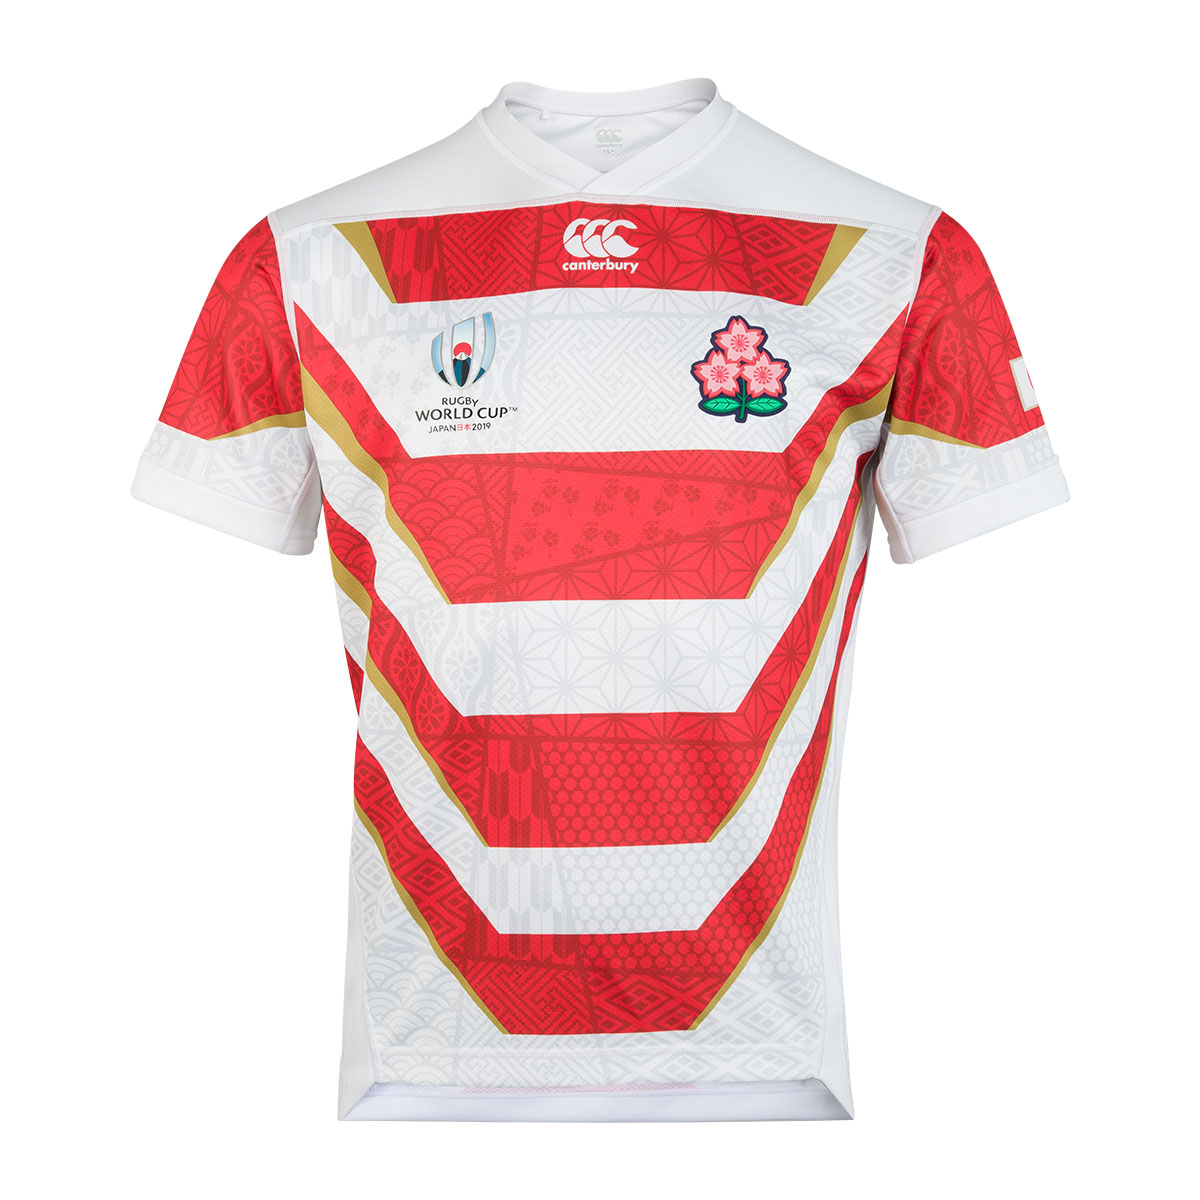 Wales Rugby World Cup 2019 Team 2 Piece Baby Kit Red Fan Top Tee Shirt 